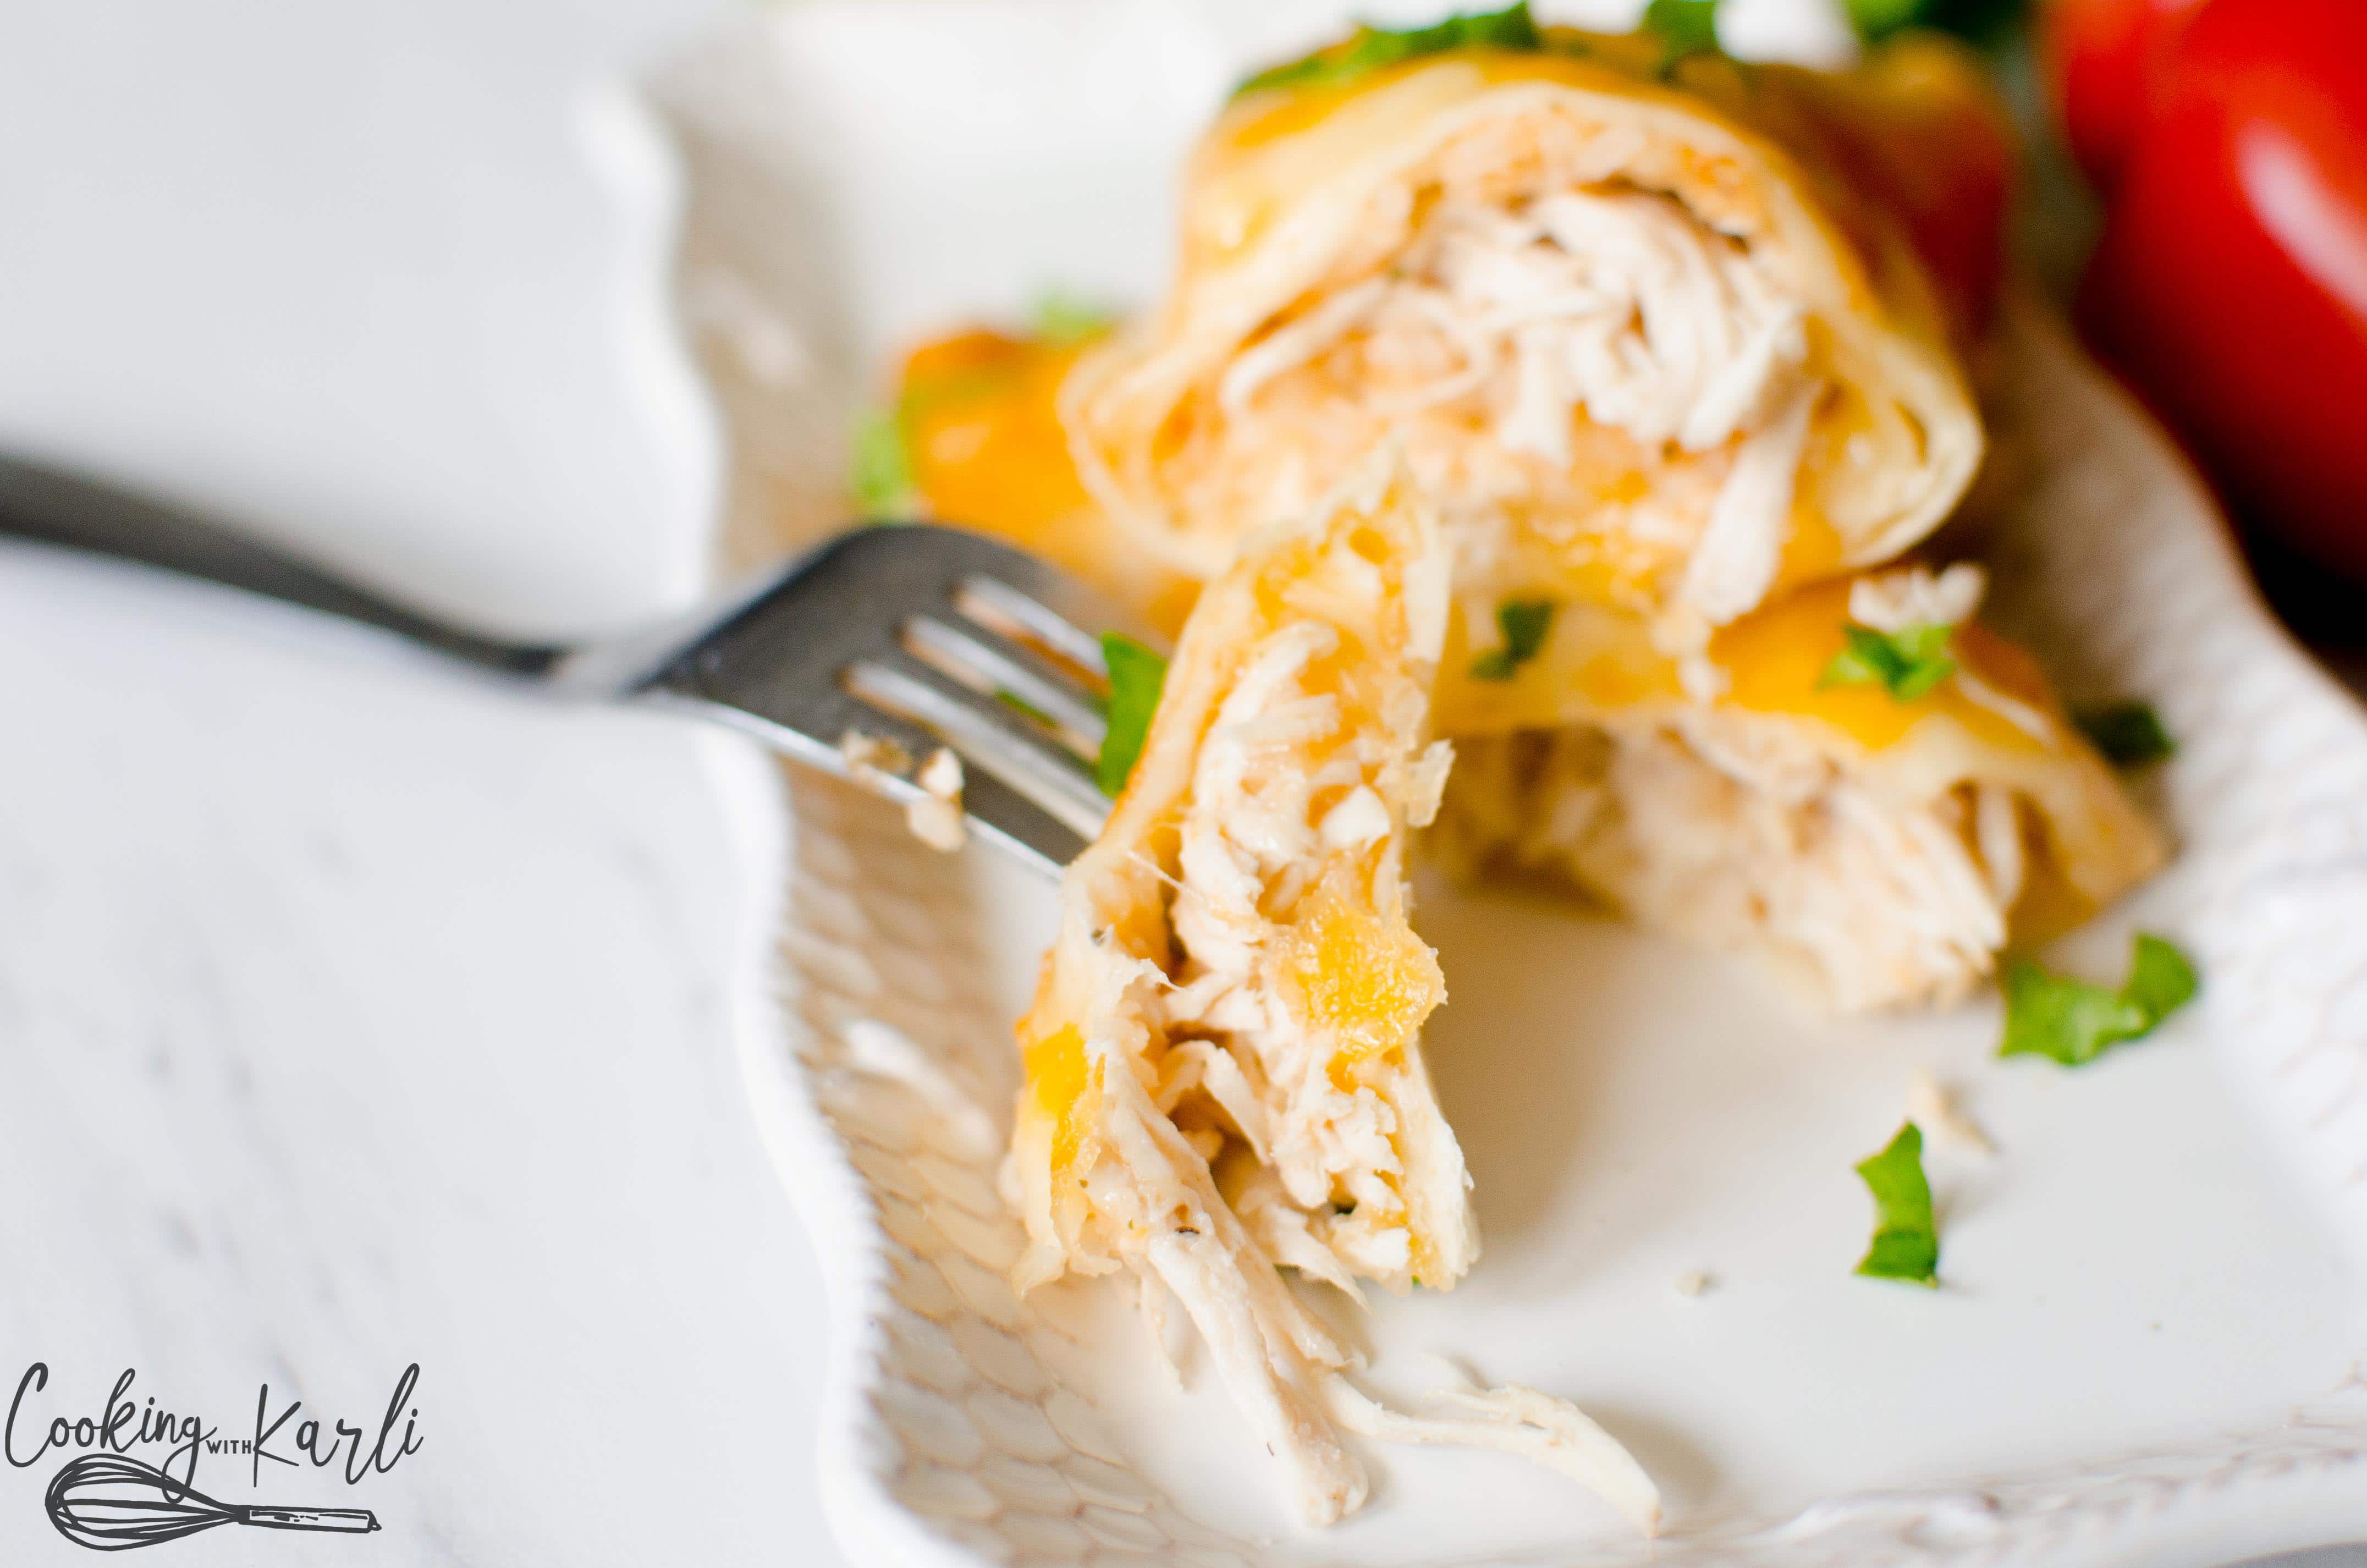 Simple, fast 30 minute meal. These chicken and rice enchiladas are a perfect quick meal.